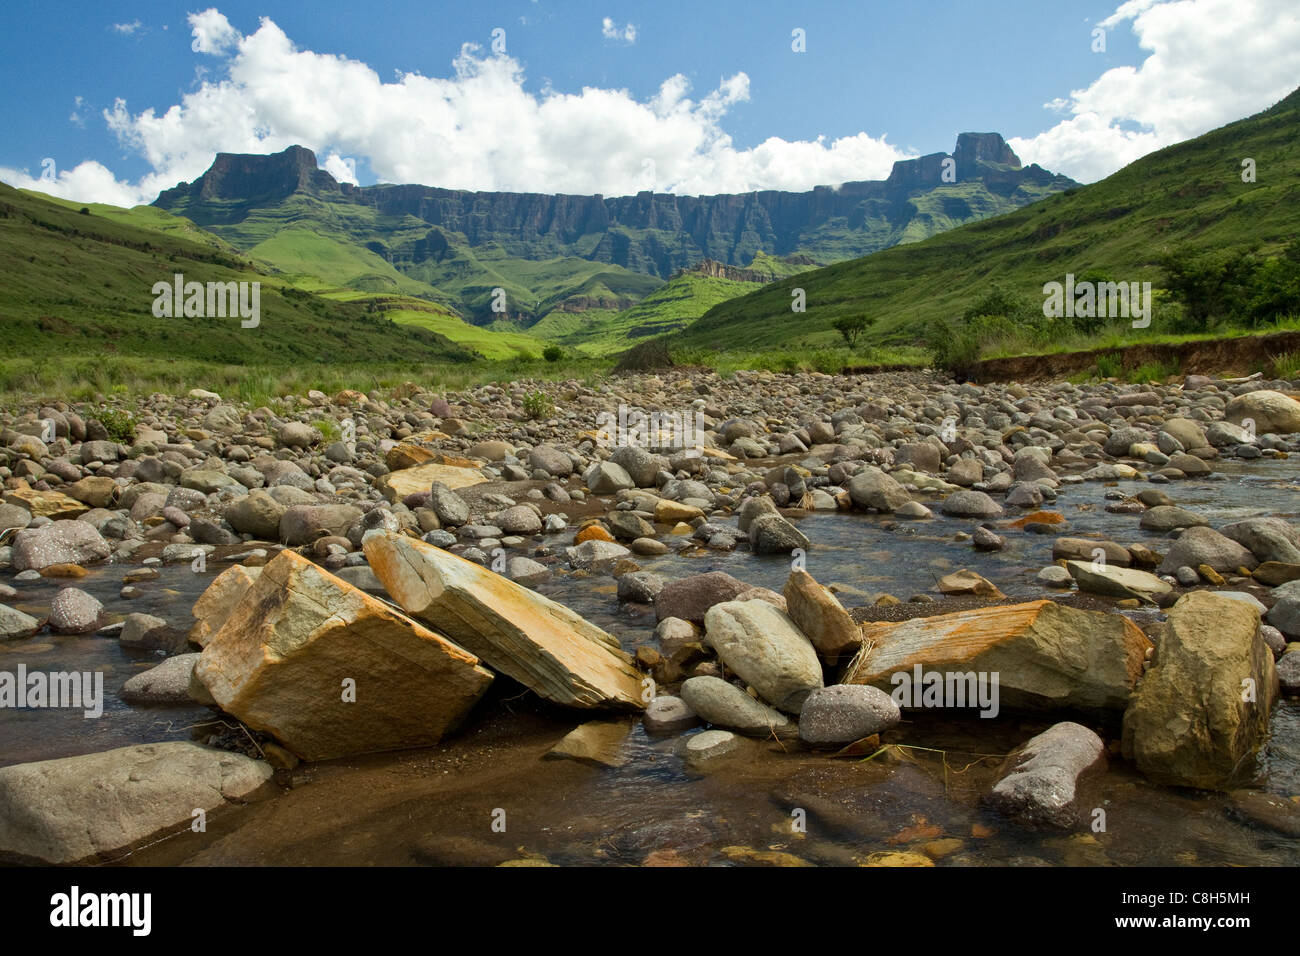 View of Ampitheatre Drakensberg Mountains from Tugela River below, South Africa Stock Photo